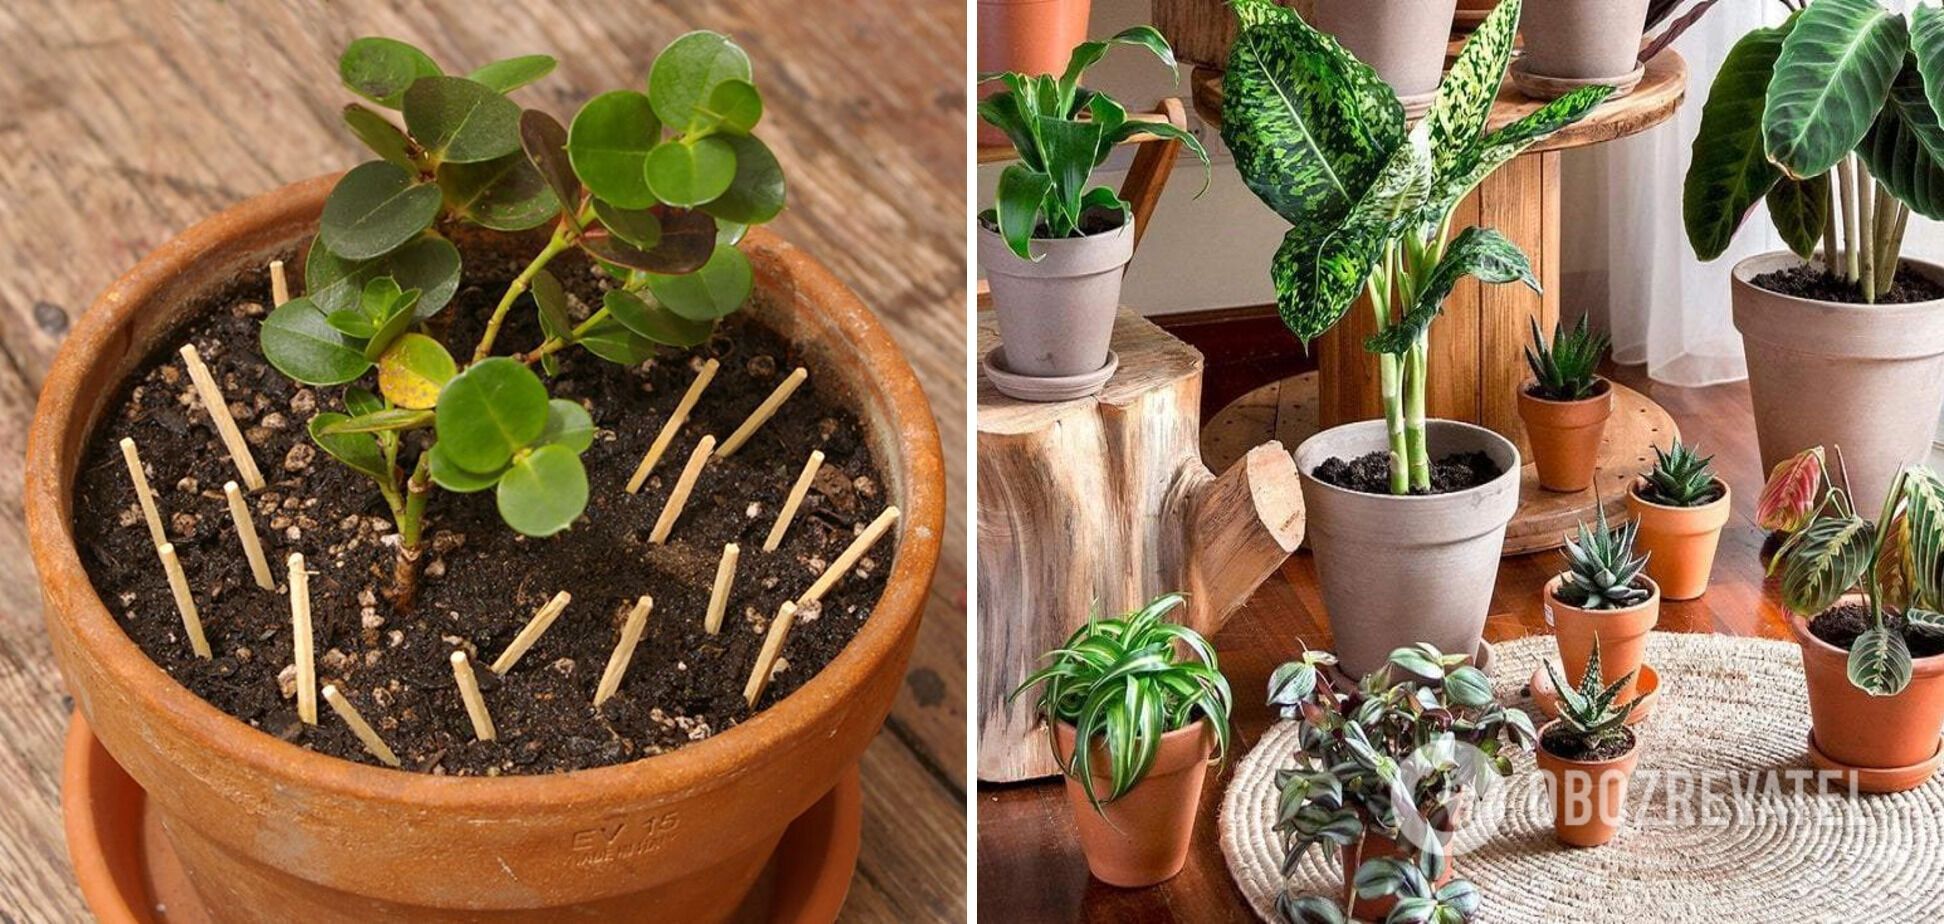 Why put matches in flower pots: a clever lifehack